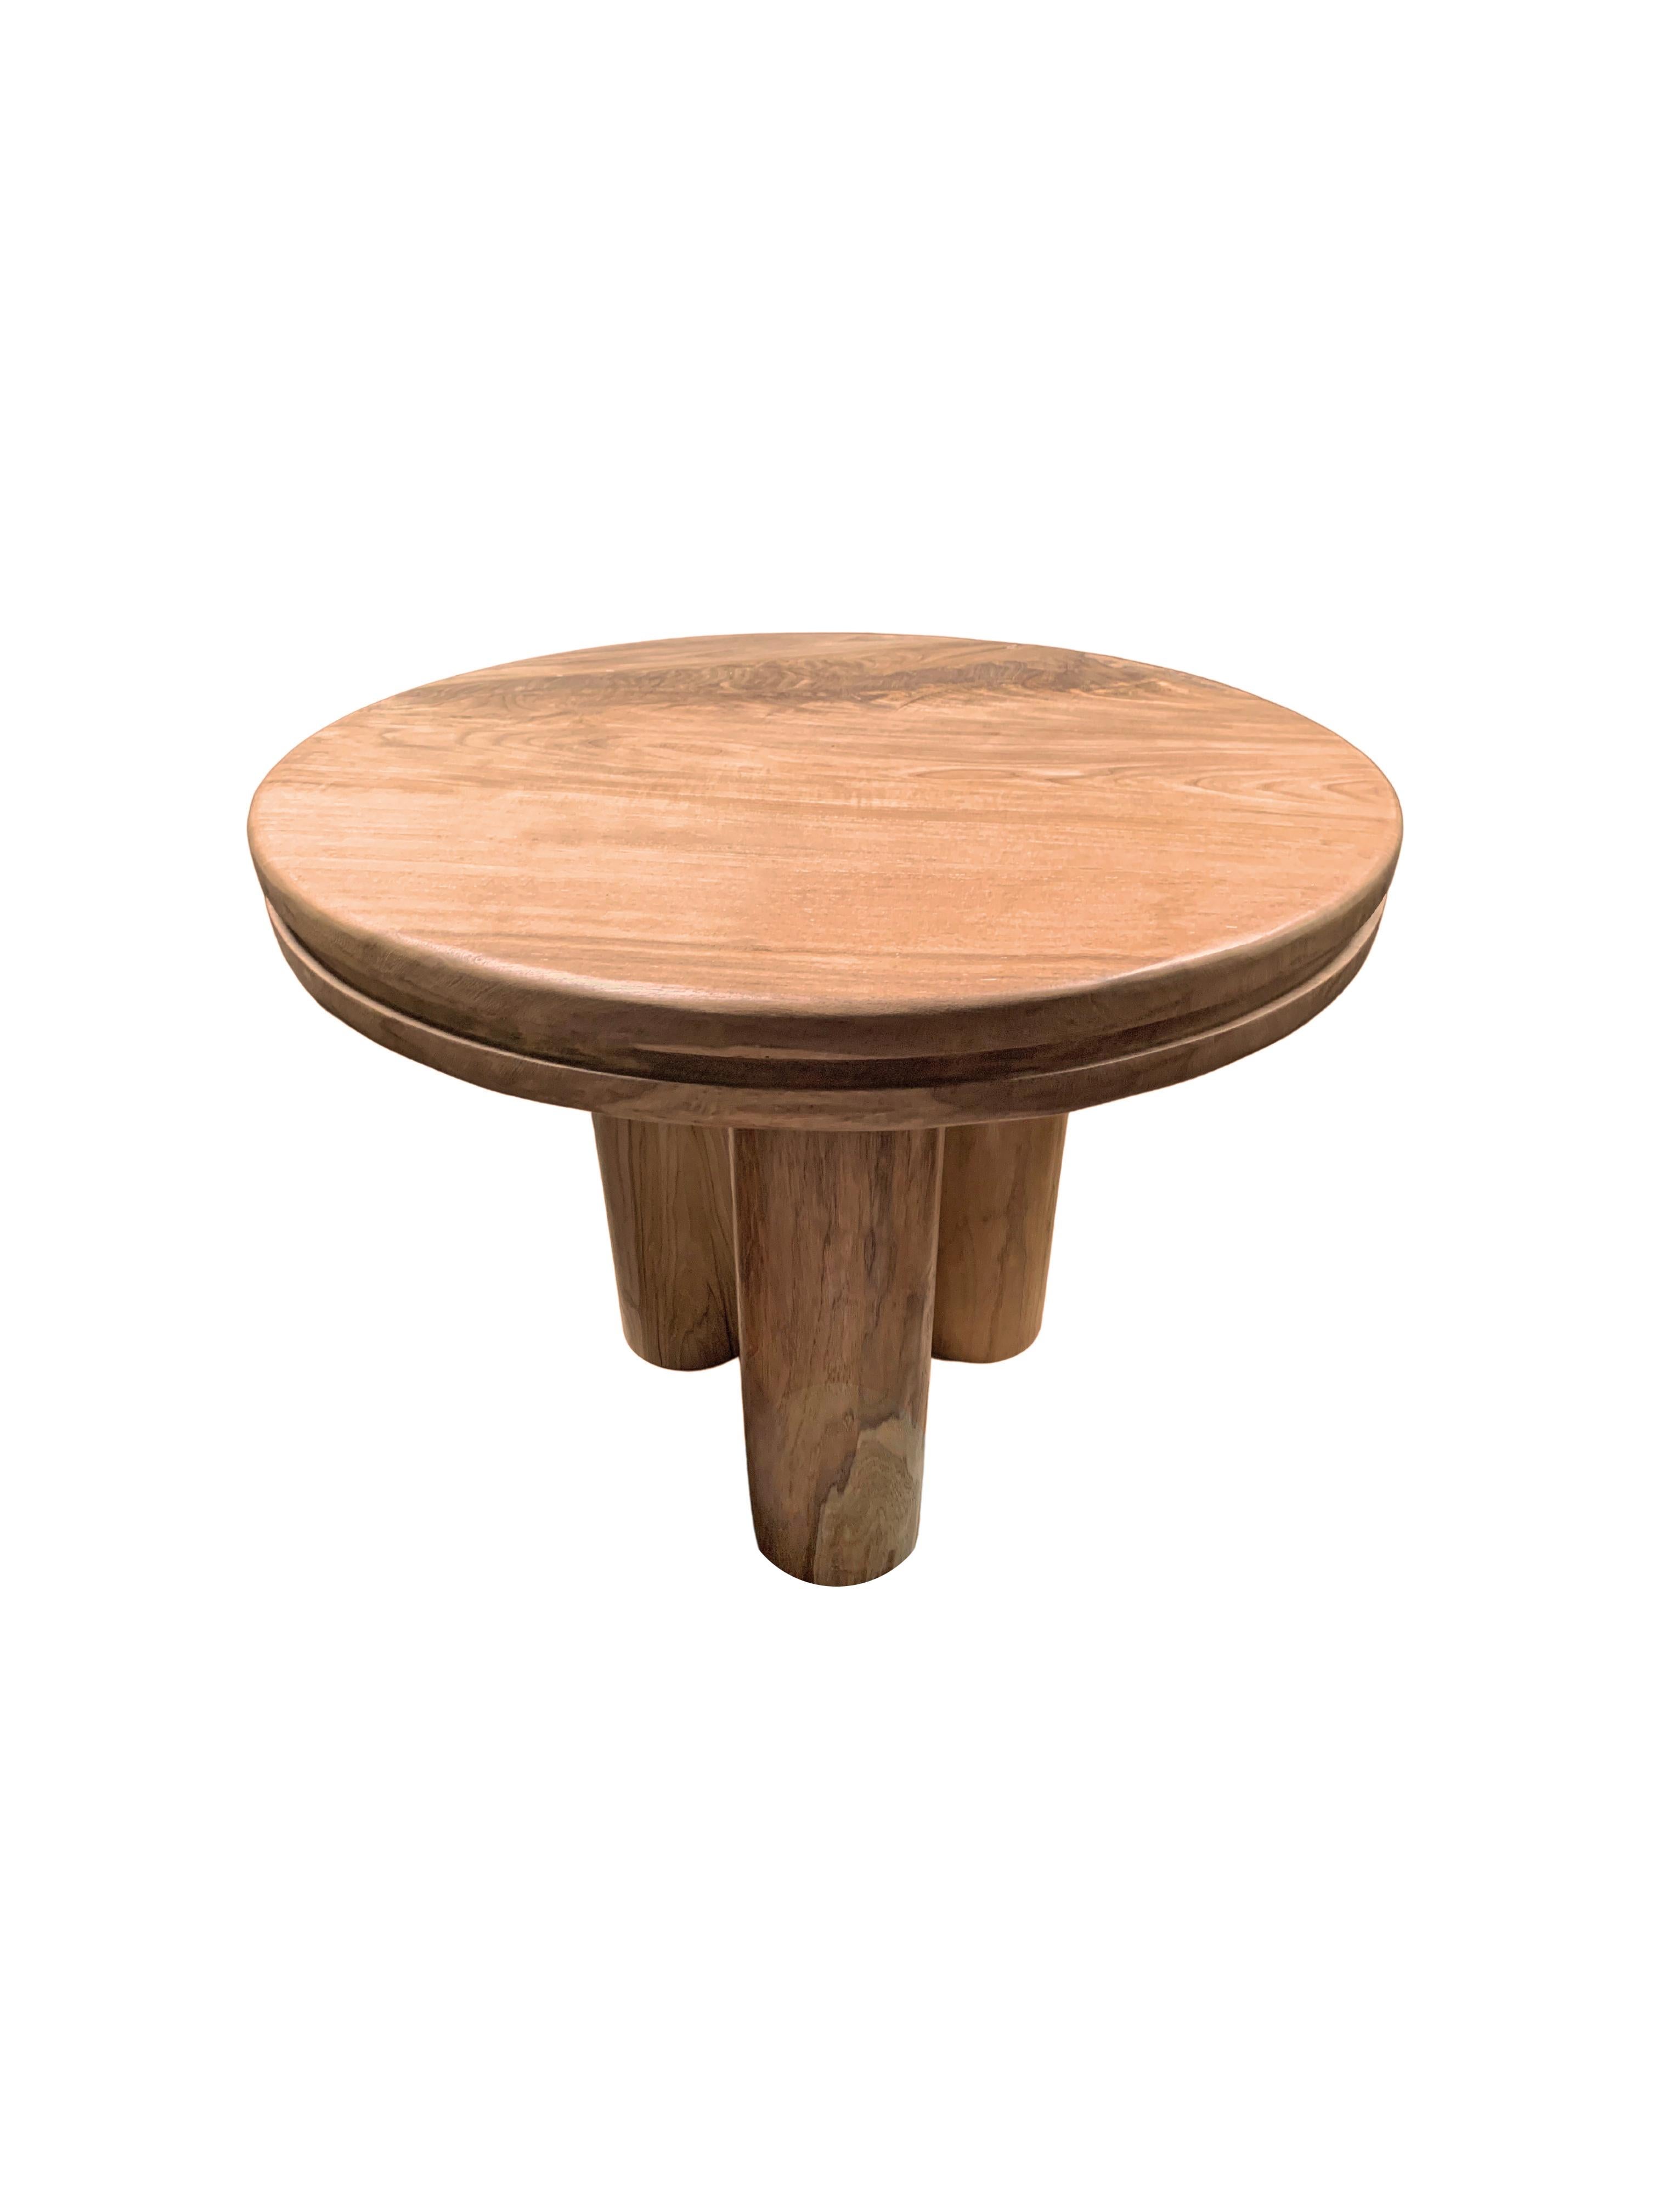 A wonderfully sculptural round side table. Crafted from solid teak wood the table top features a carved channel that wraps around its circumference. The table features three cylindrical legs. The wood textures and shades throughout add to its charm.